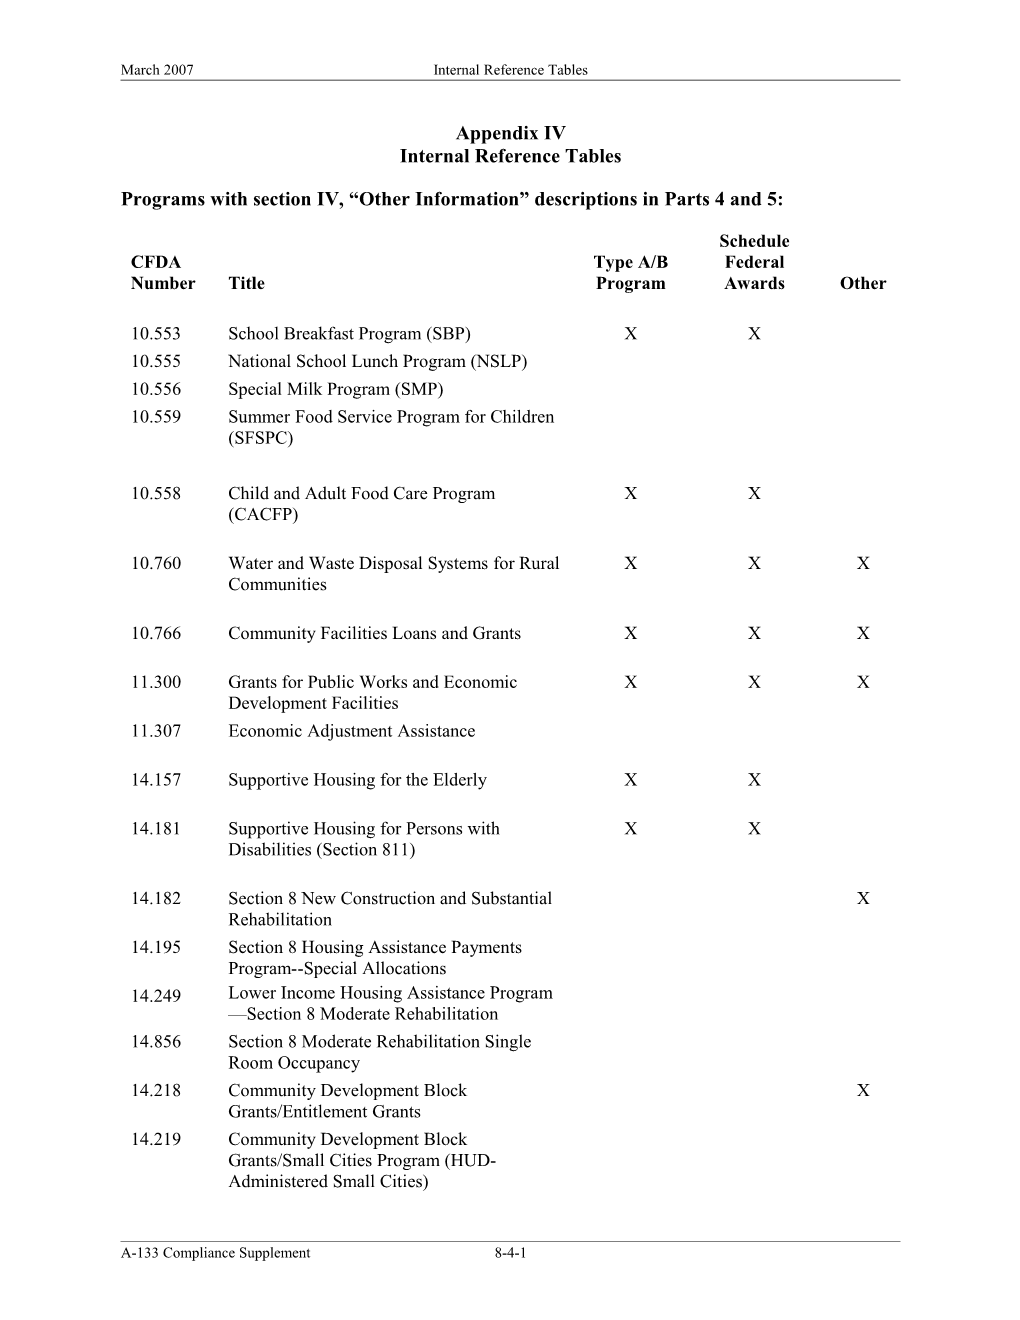 Programs with Section IV, Other Information Descriptions in Parts 4 and 5